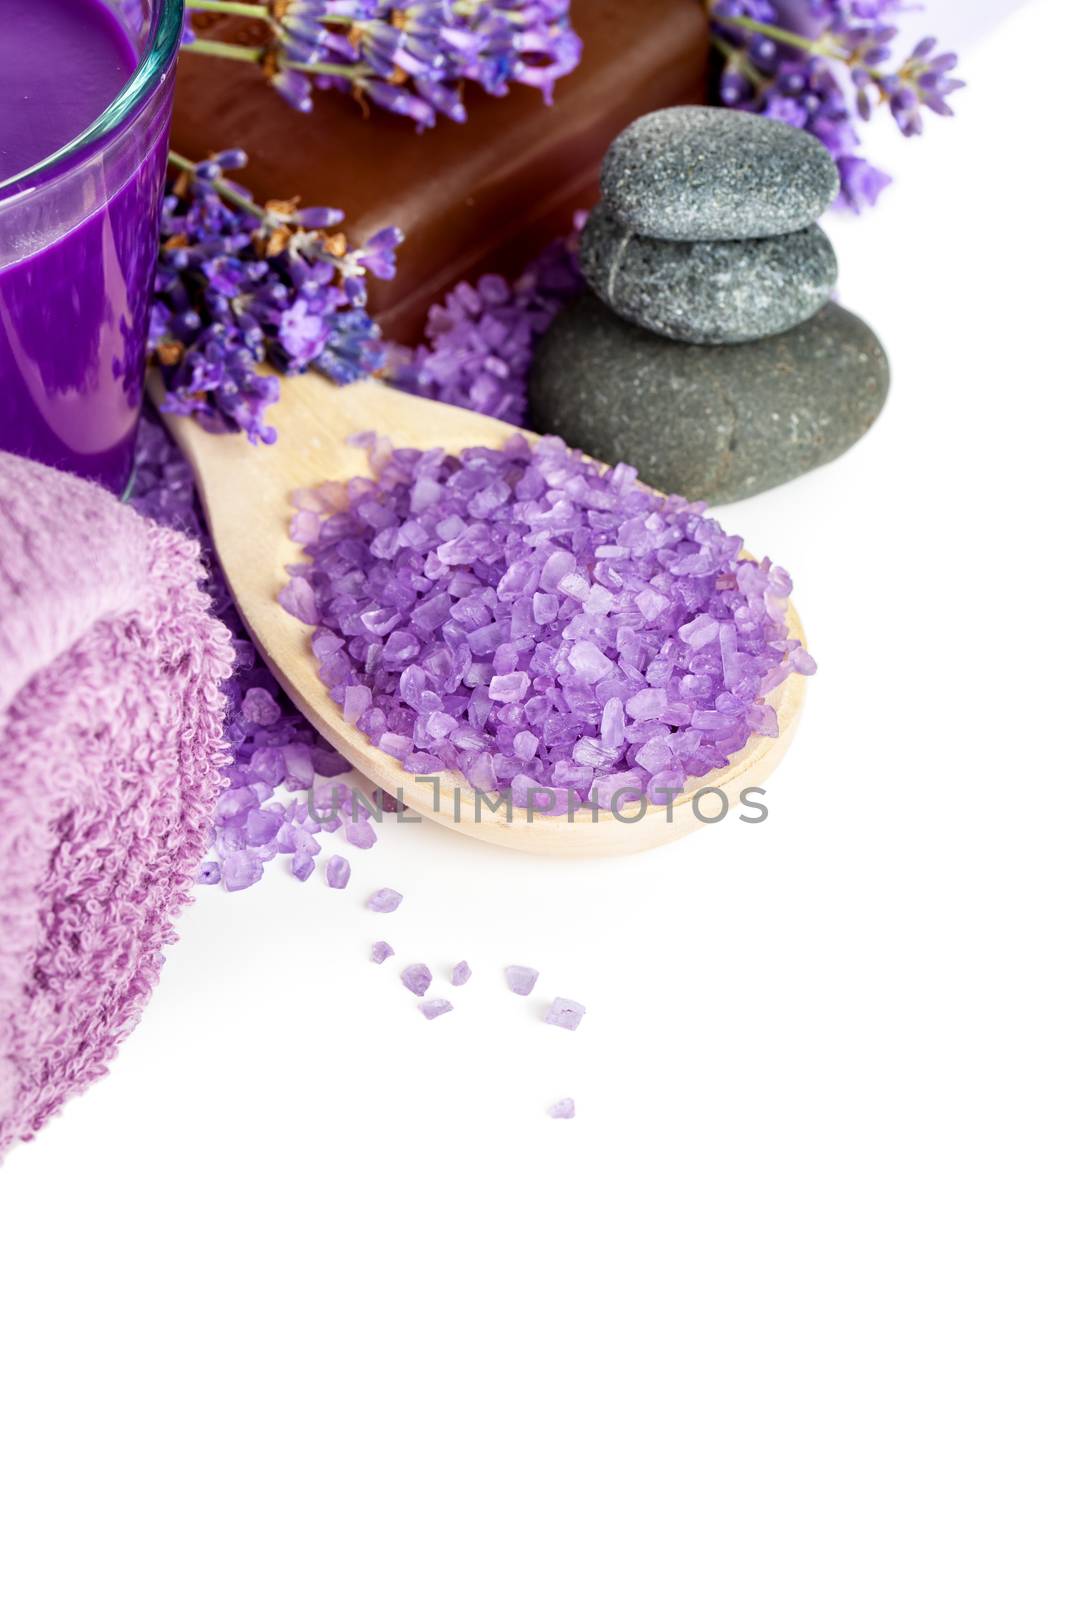 Lavender spa. Beauty composition on white background. Copy space
